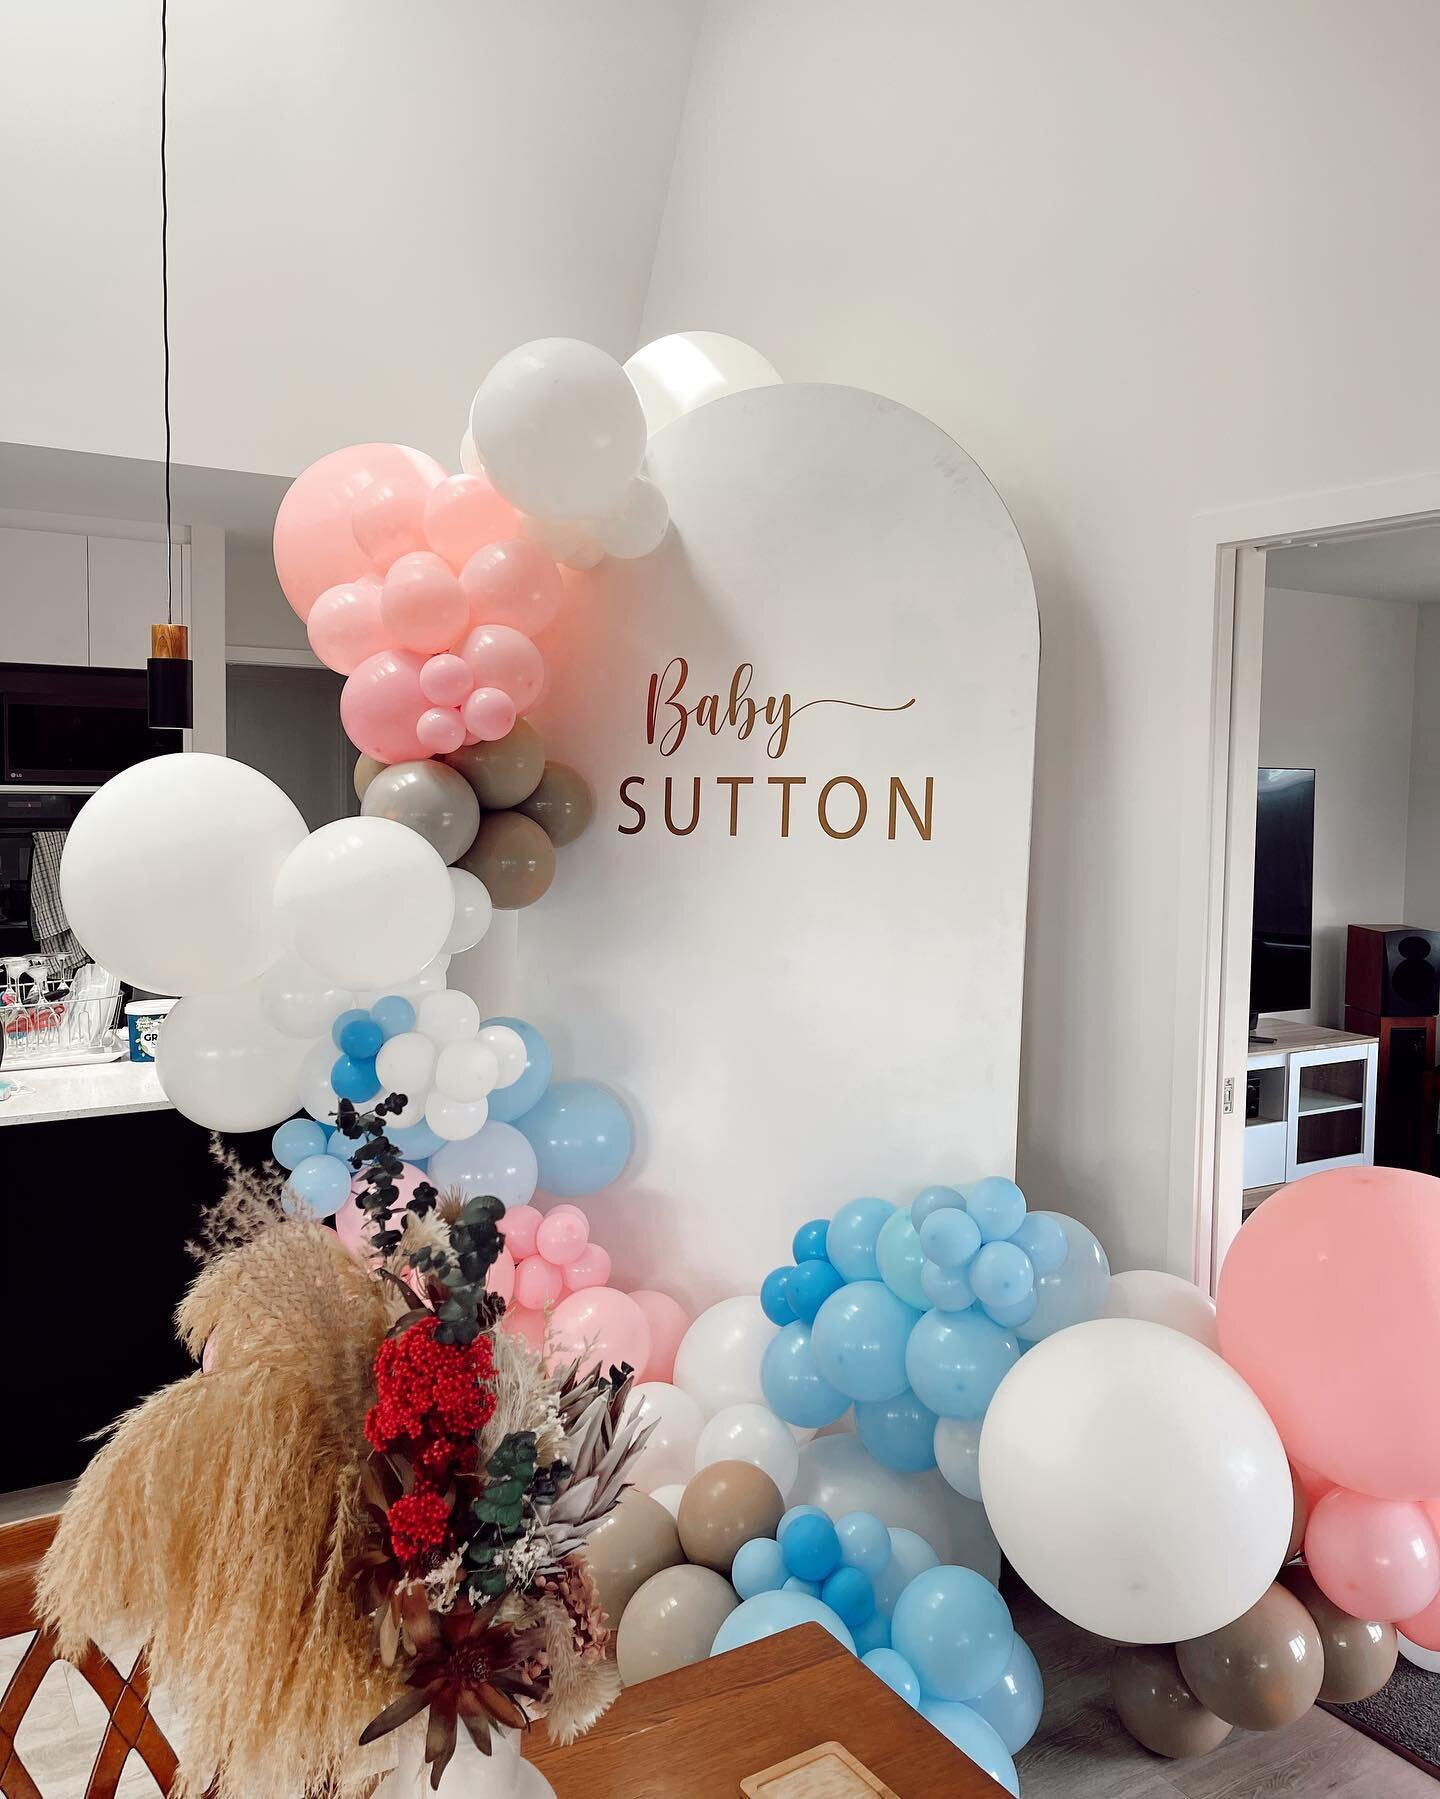 &mdash;&mdash; baby love 💘

We love taking your gender reveals to the next level! The best is returning for packdown &amp; we don&rsquo;t even need to ask what it&rsquo;ll be&hellip; because the coloured confetti tells all as it lies scattered acros